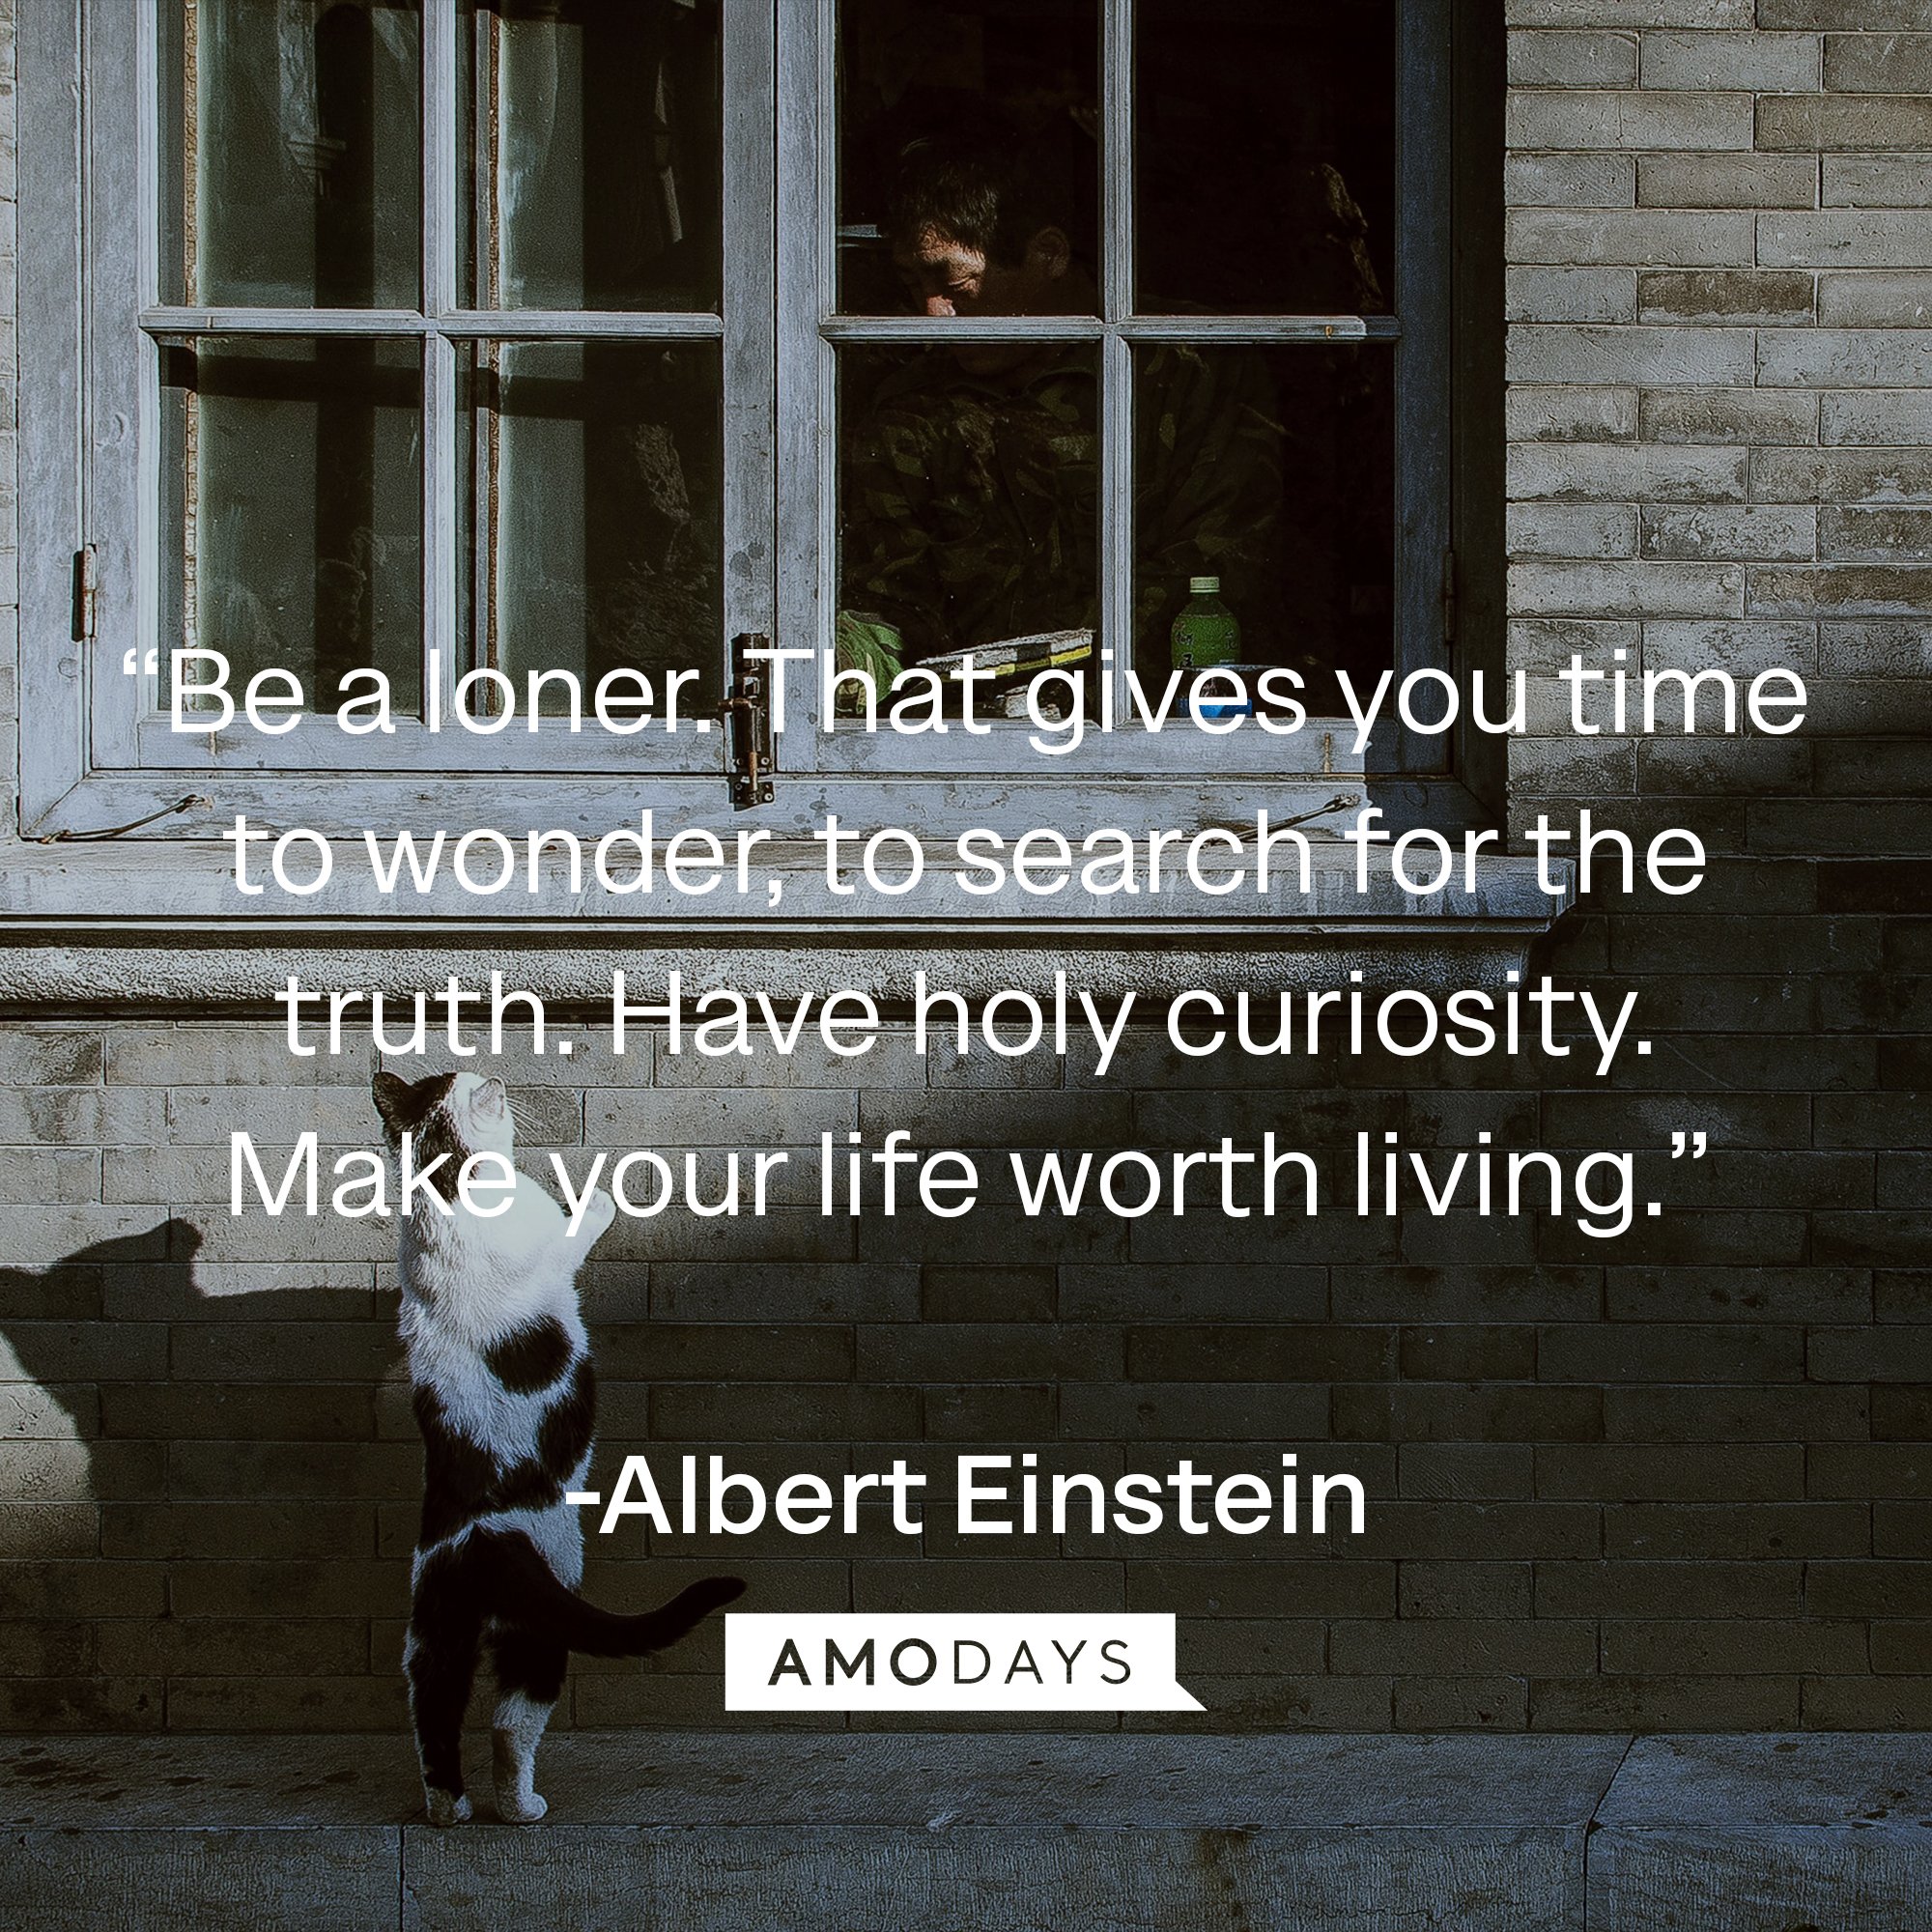  Albert Einstein's quote: “Be a loner. That gives you time to wonder, to search for the truth. Have holy curiosity. Make your life worth living.” | Image: AmoDays